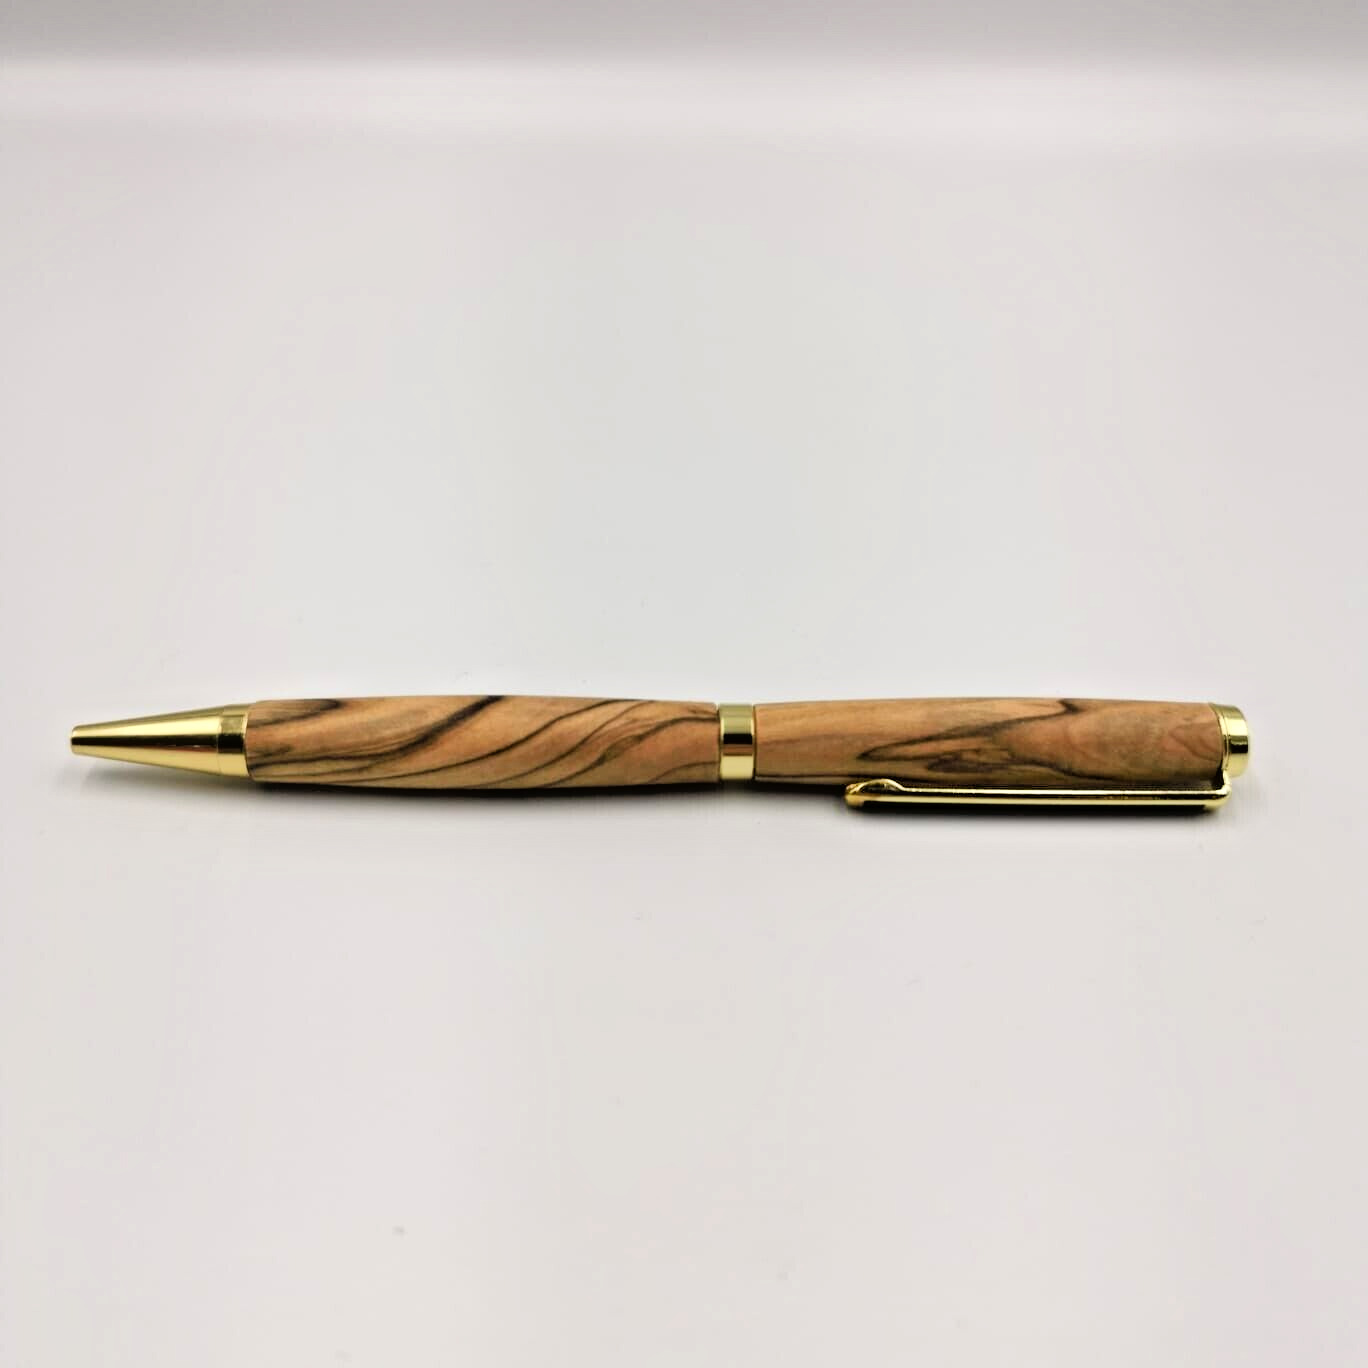 NEW Olive Wood VINTAGE HANDMADE PEN HIGH QUALITY Office Luxury Best Gift